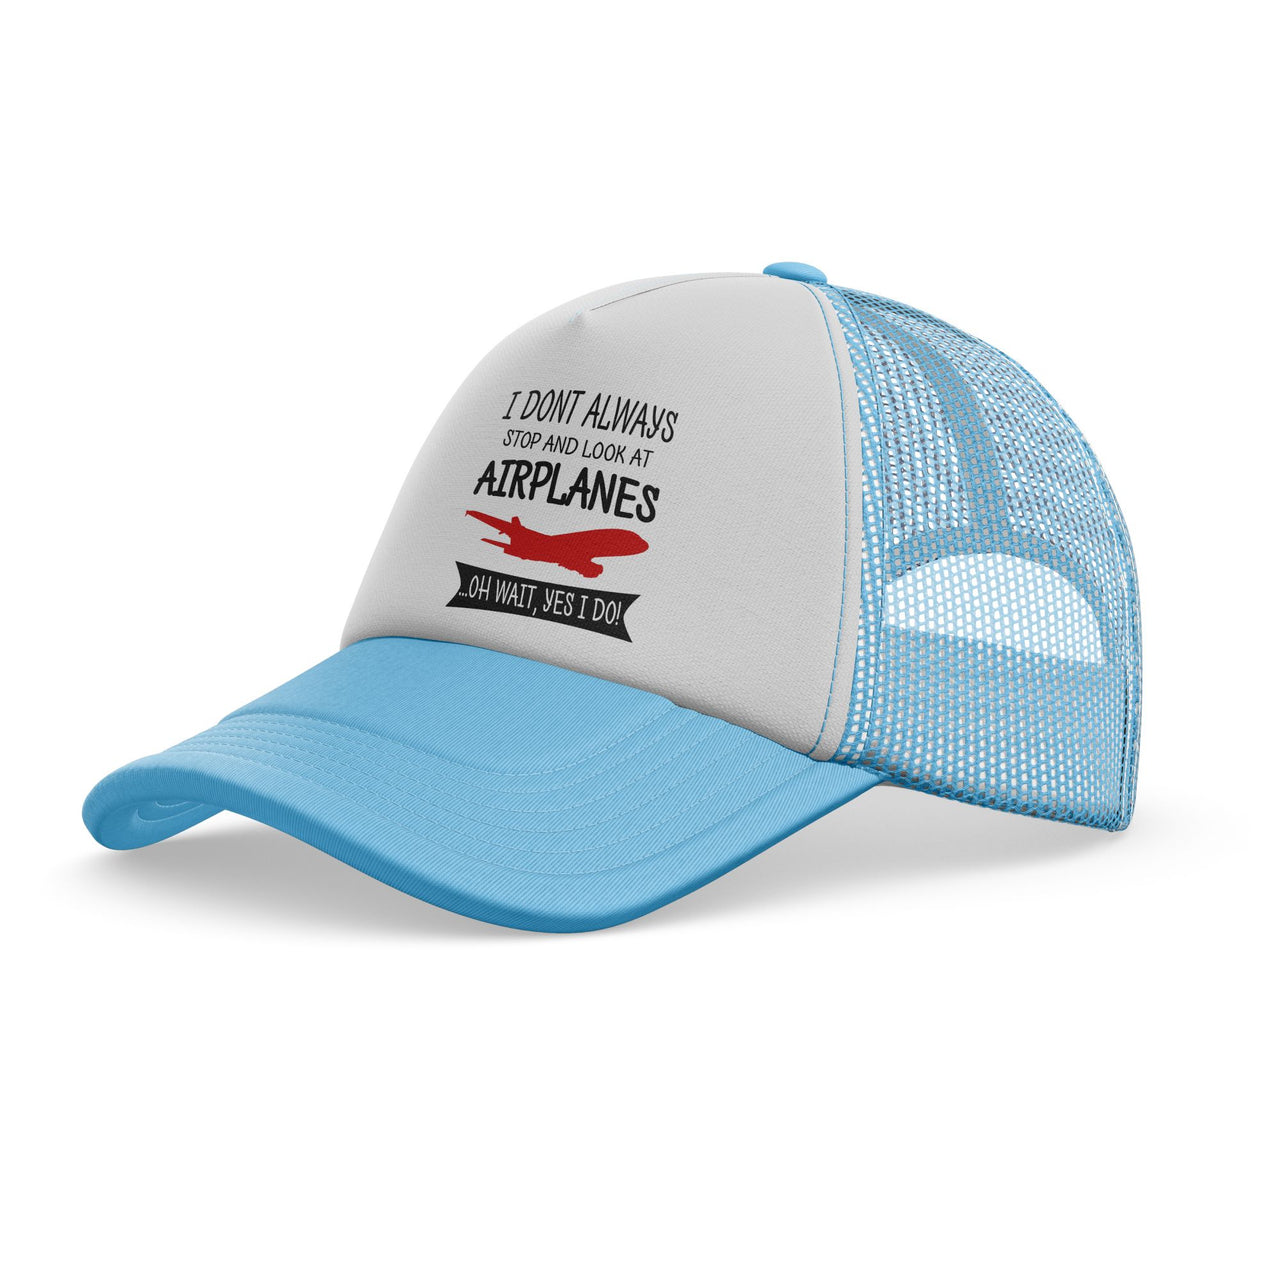 I Don't Always Stop and Look at Airplanes Designed Trucker Caps & Hats